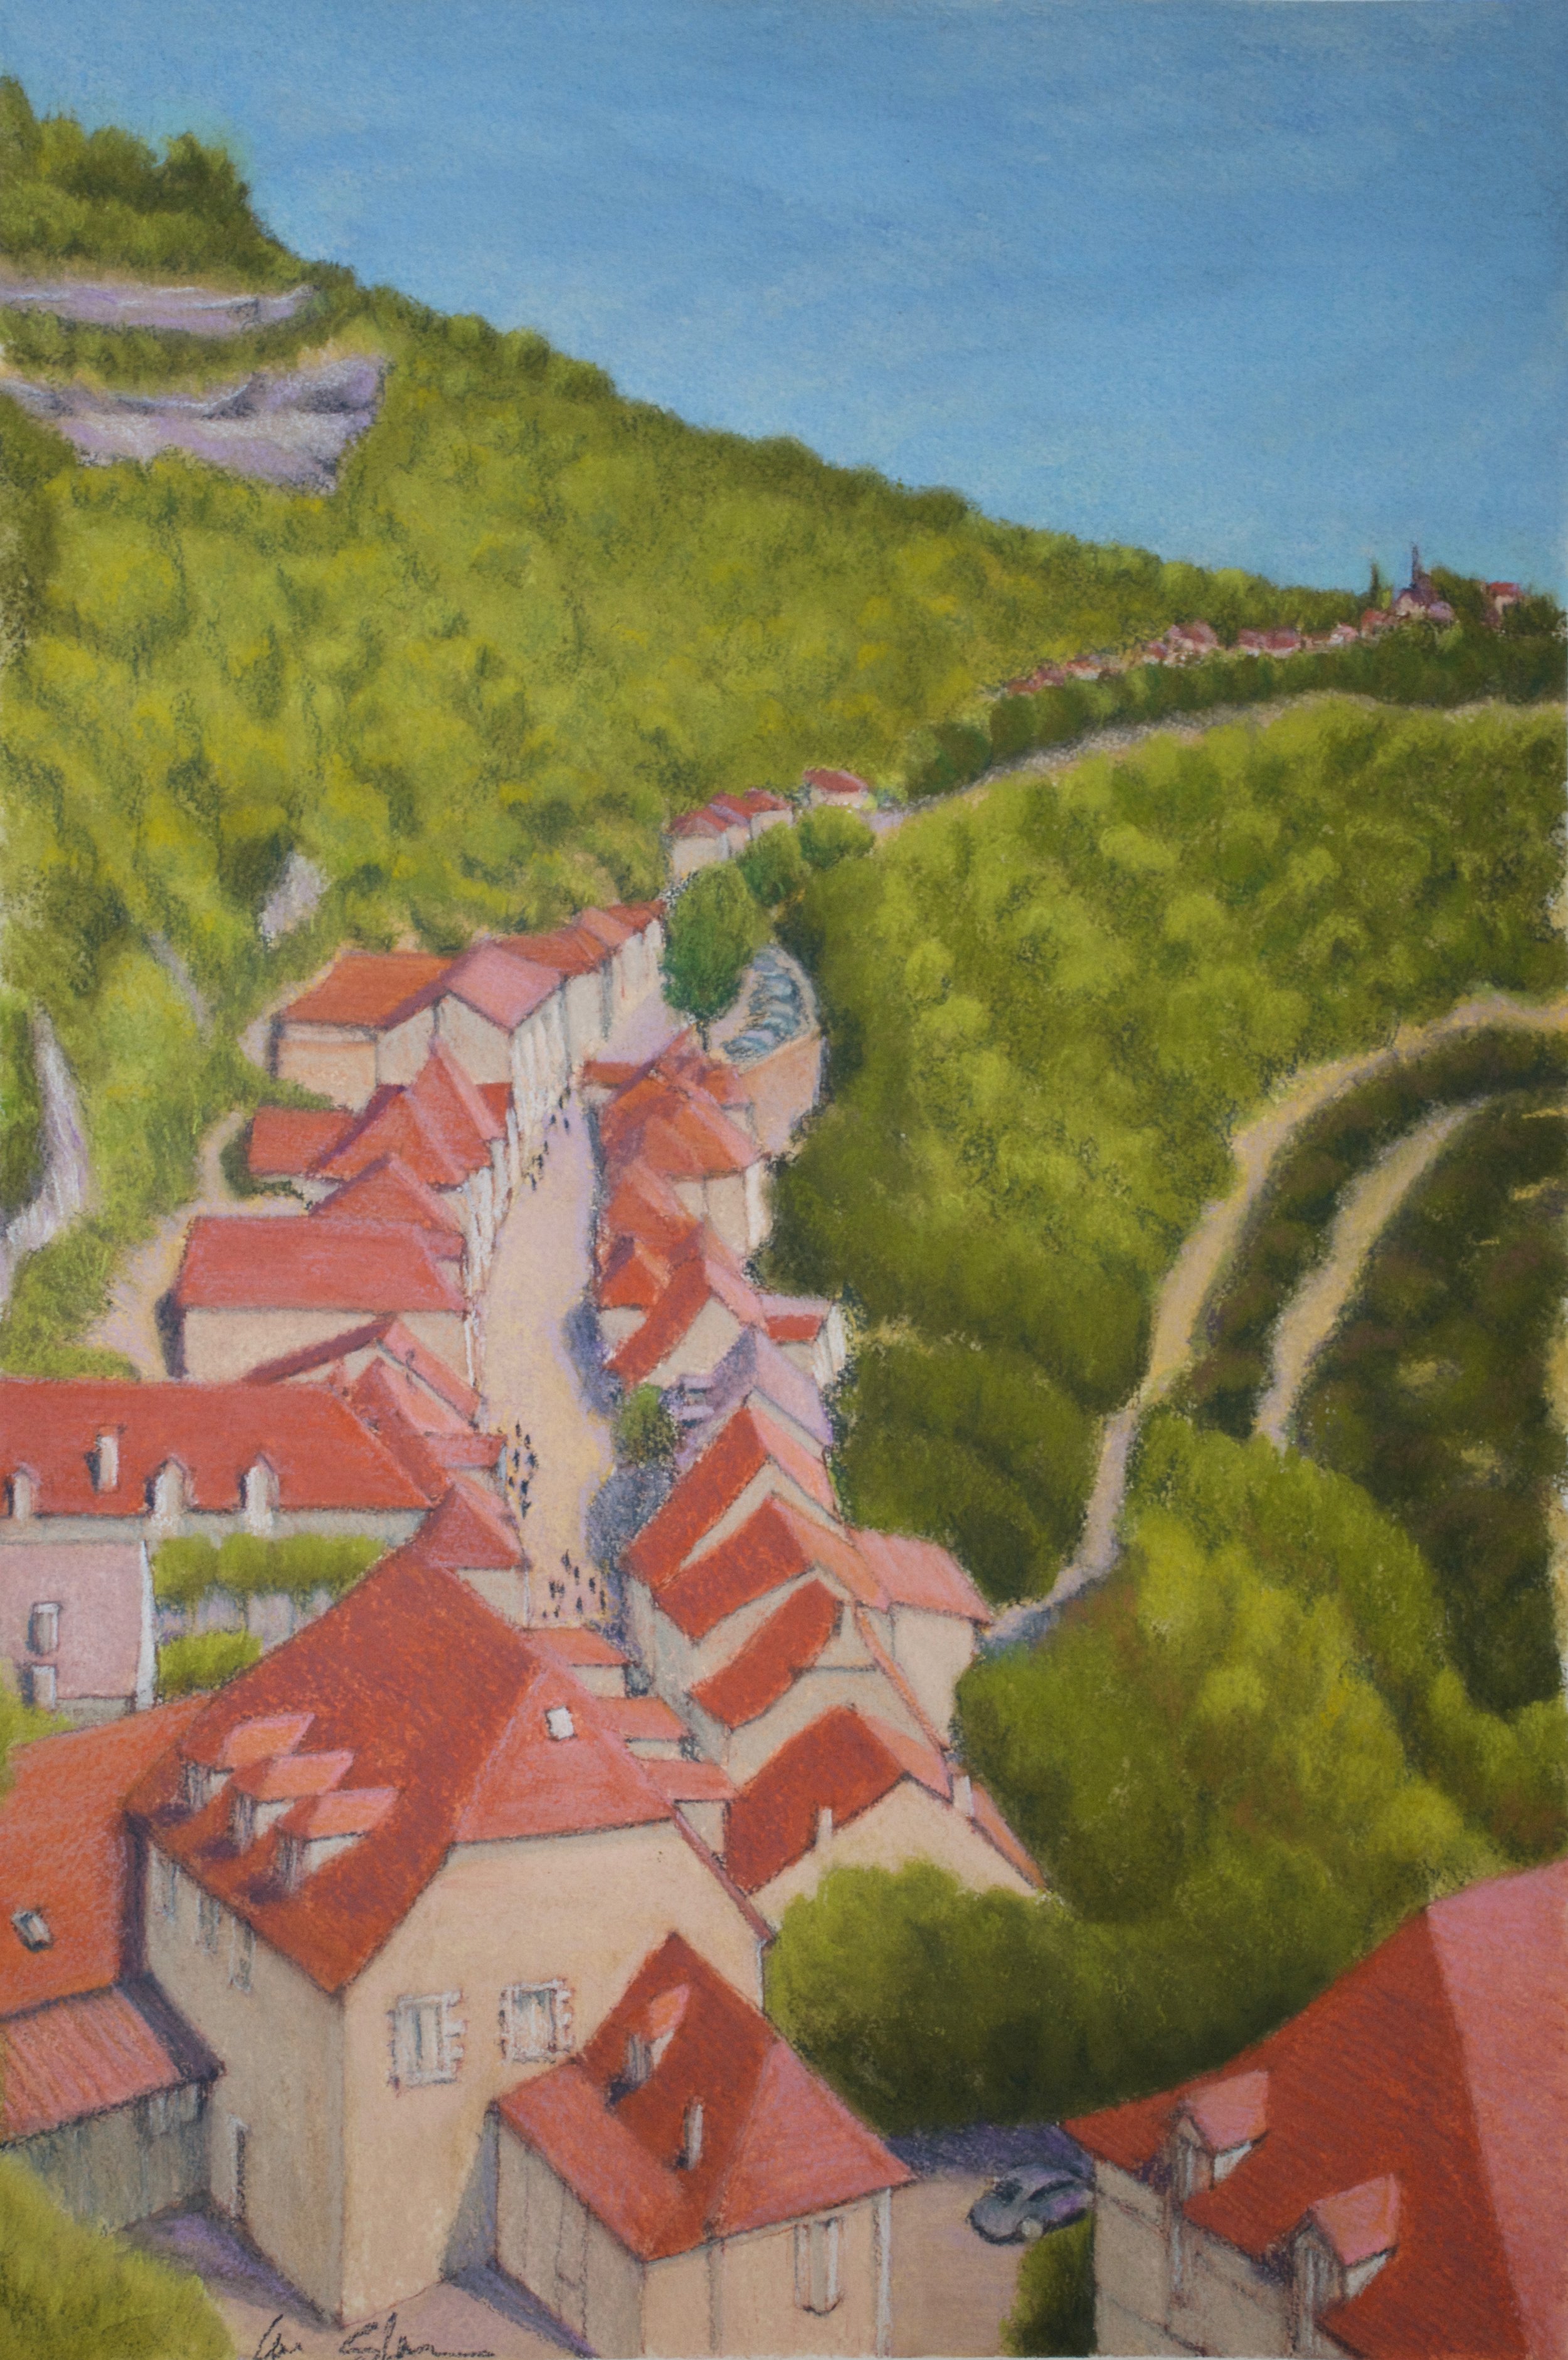  Rocamadour, 2015  pastel on paper, 18x24 inches 